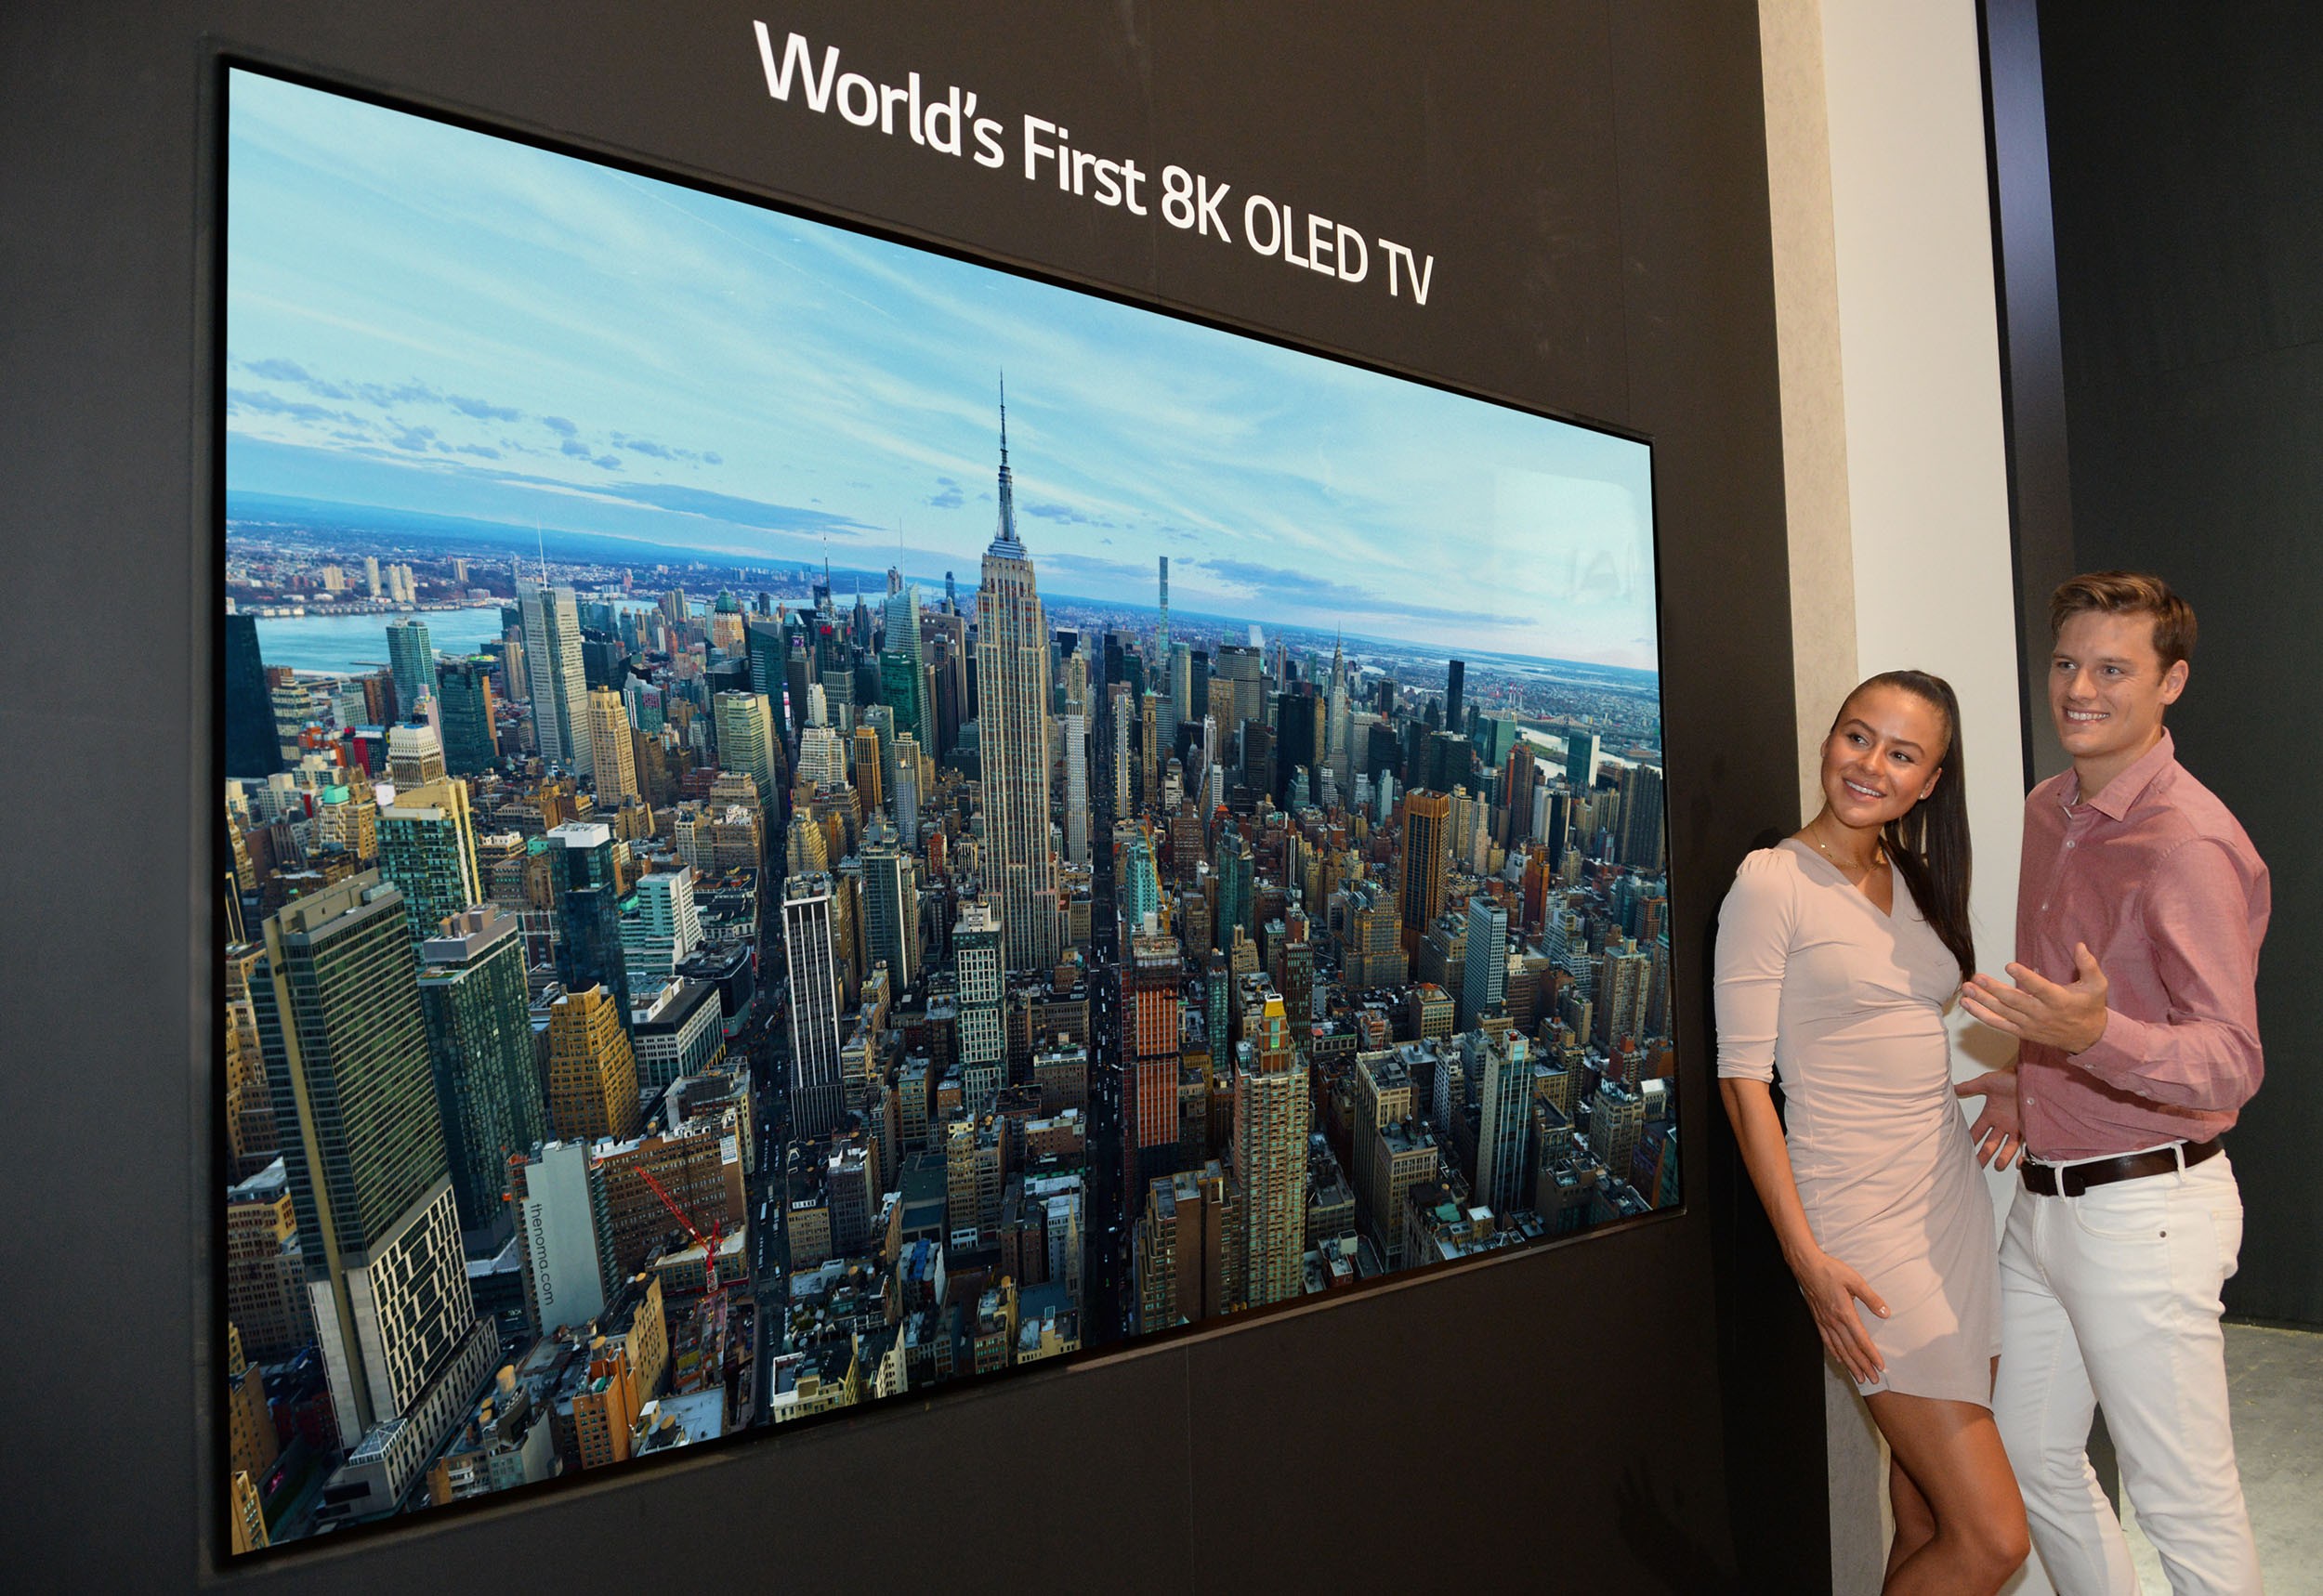 Two models look in awe at the world’s first LG 8K OLED TV displayed at IFA 2018